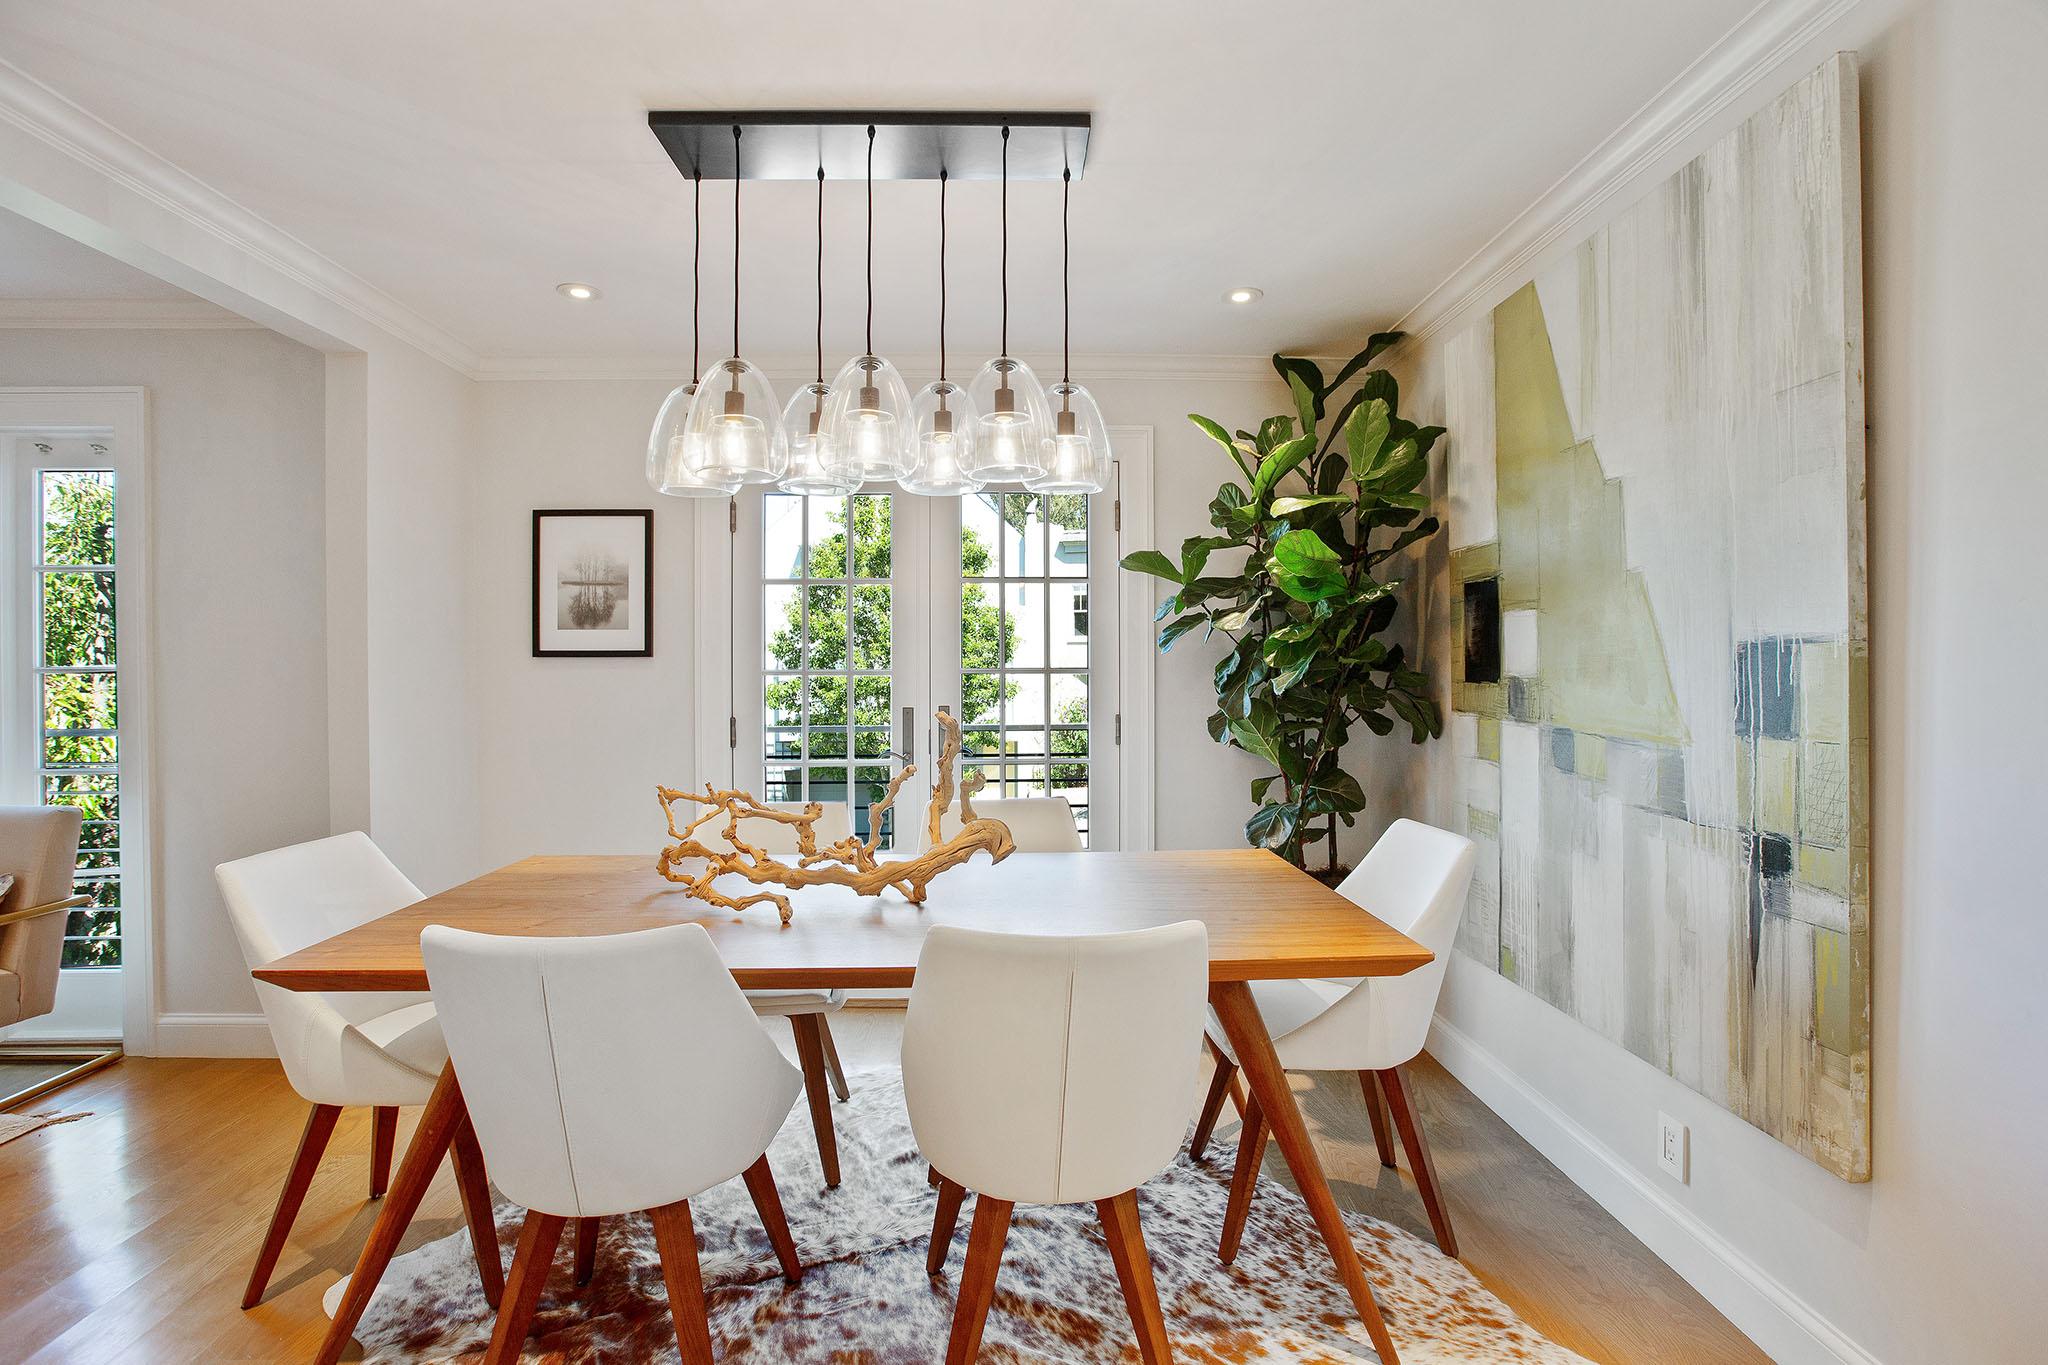 Property Photo: Centered photo of dining table. There is a modern glass light fixture above dining table. 